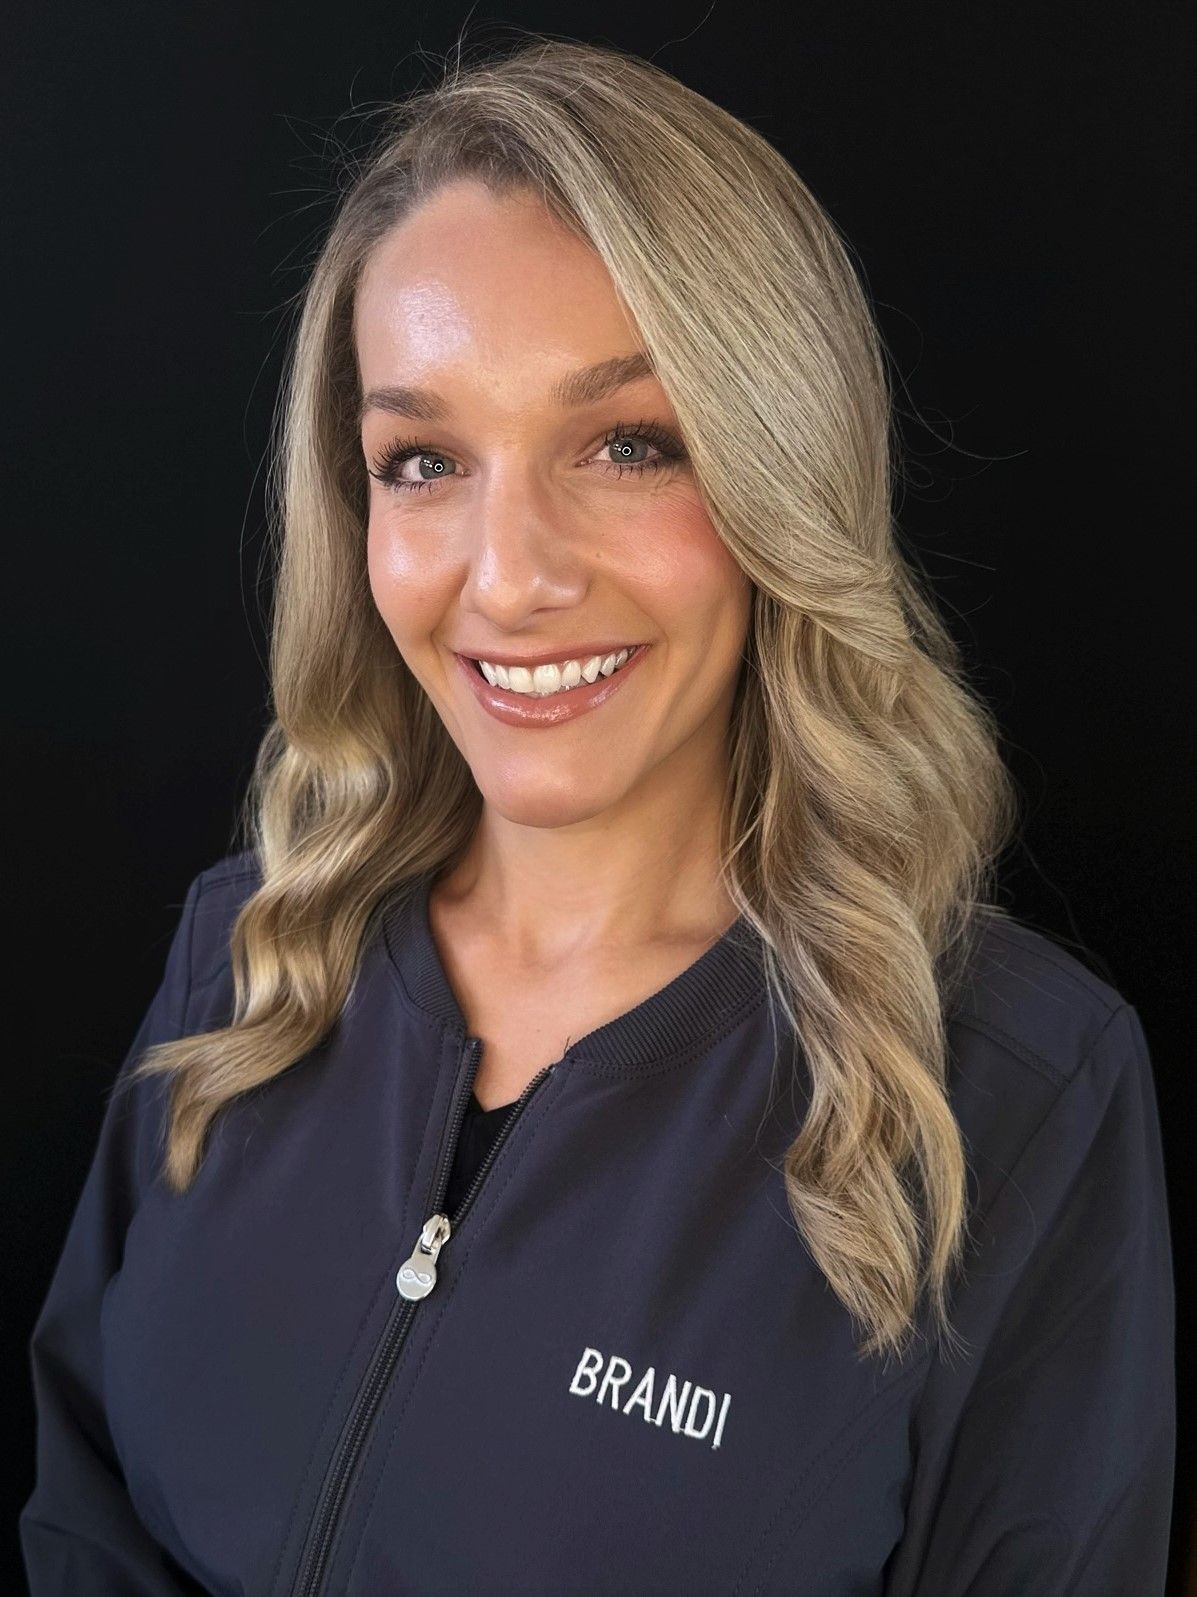 Brandi Expanded Functions Dental Assistant